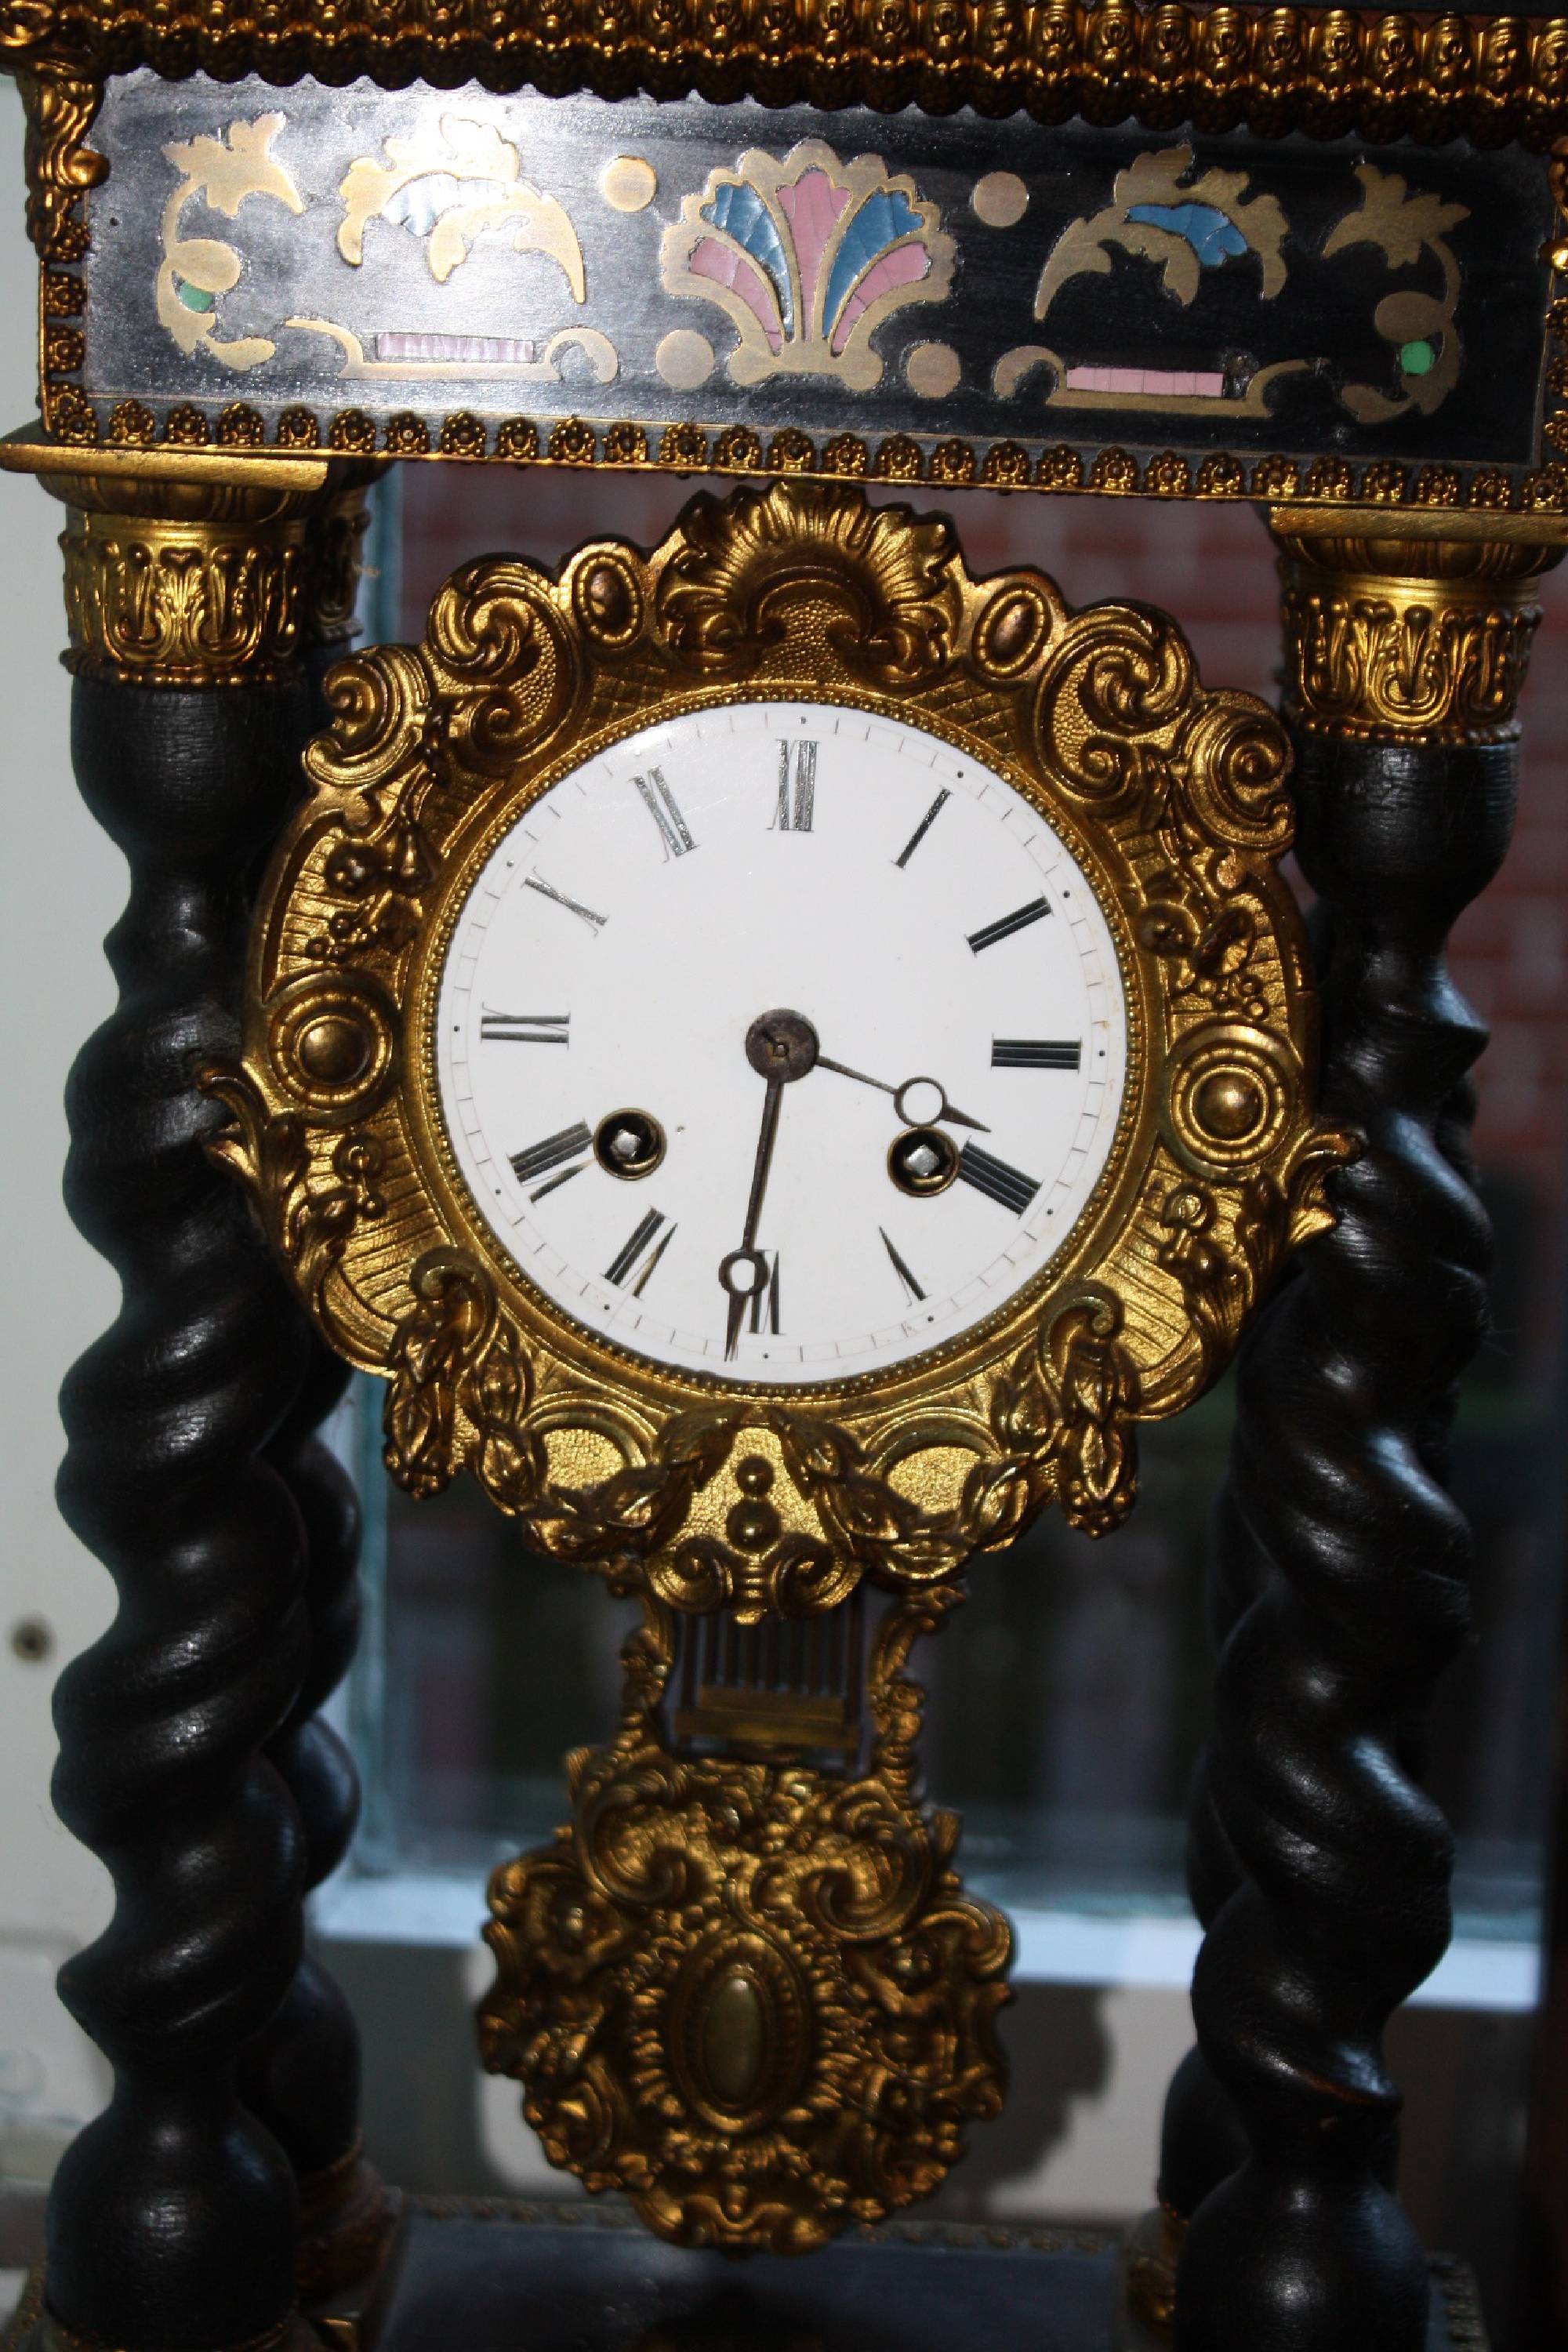 A French ornate antique 19th century mantel clock with four ebonized tortuous pillars and inlays